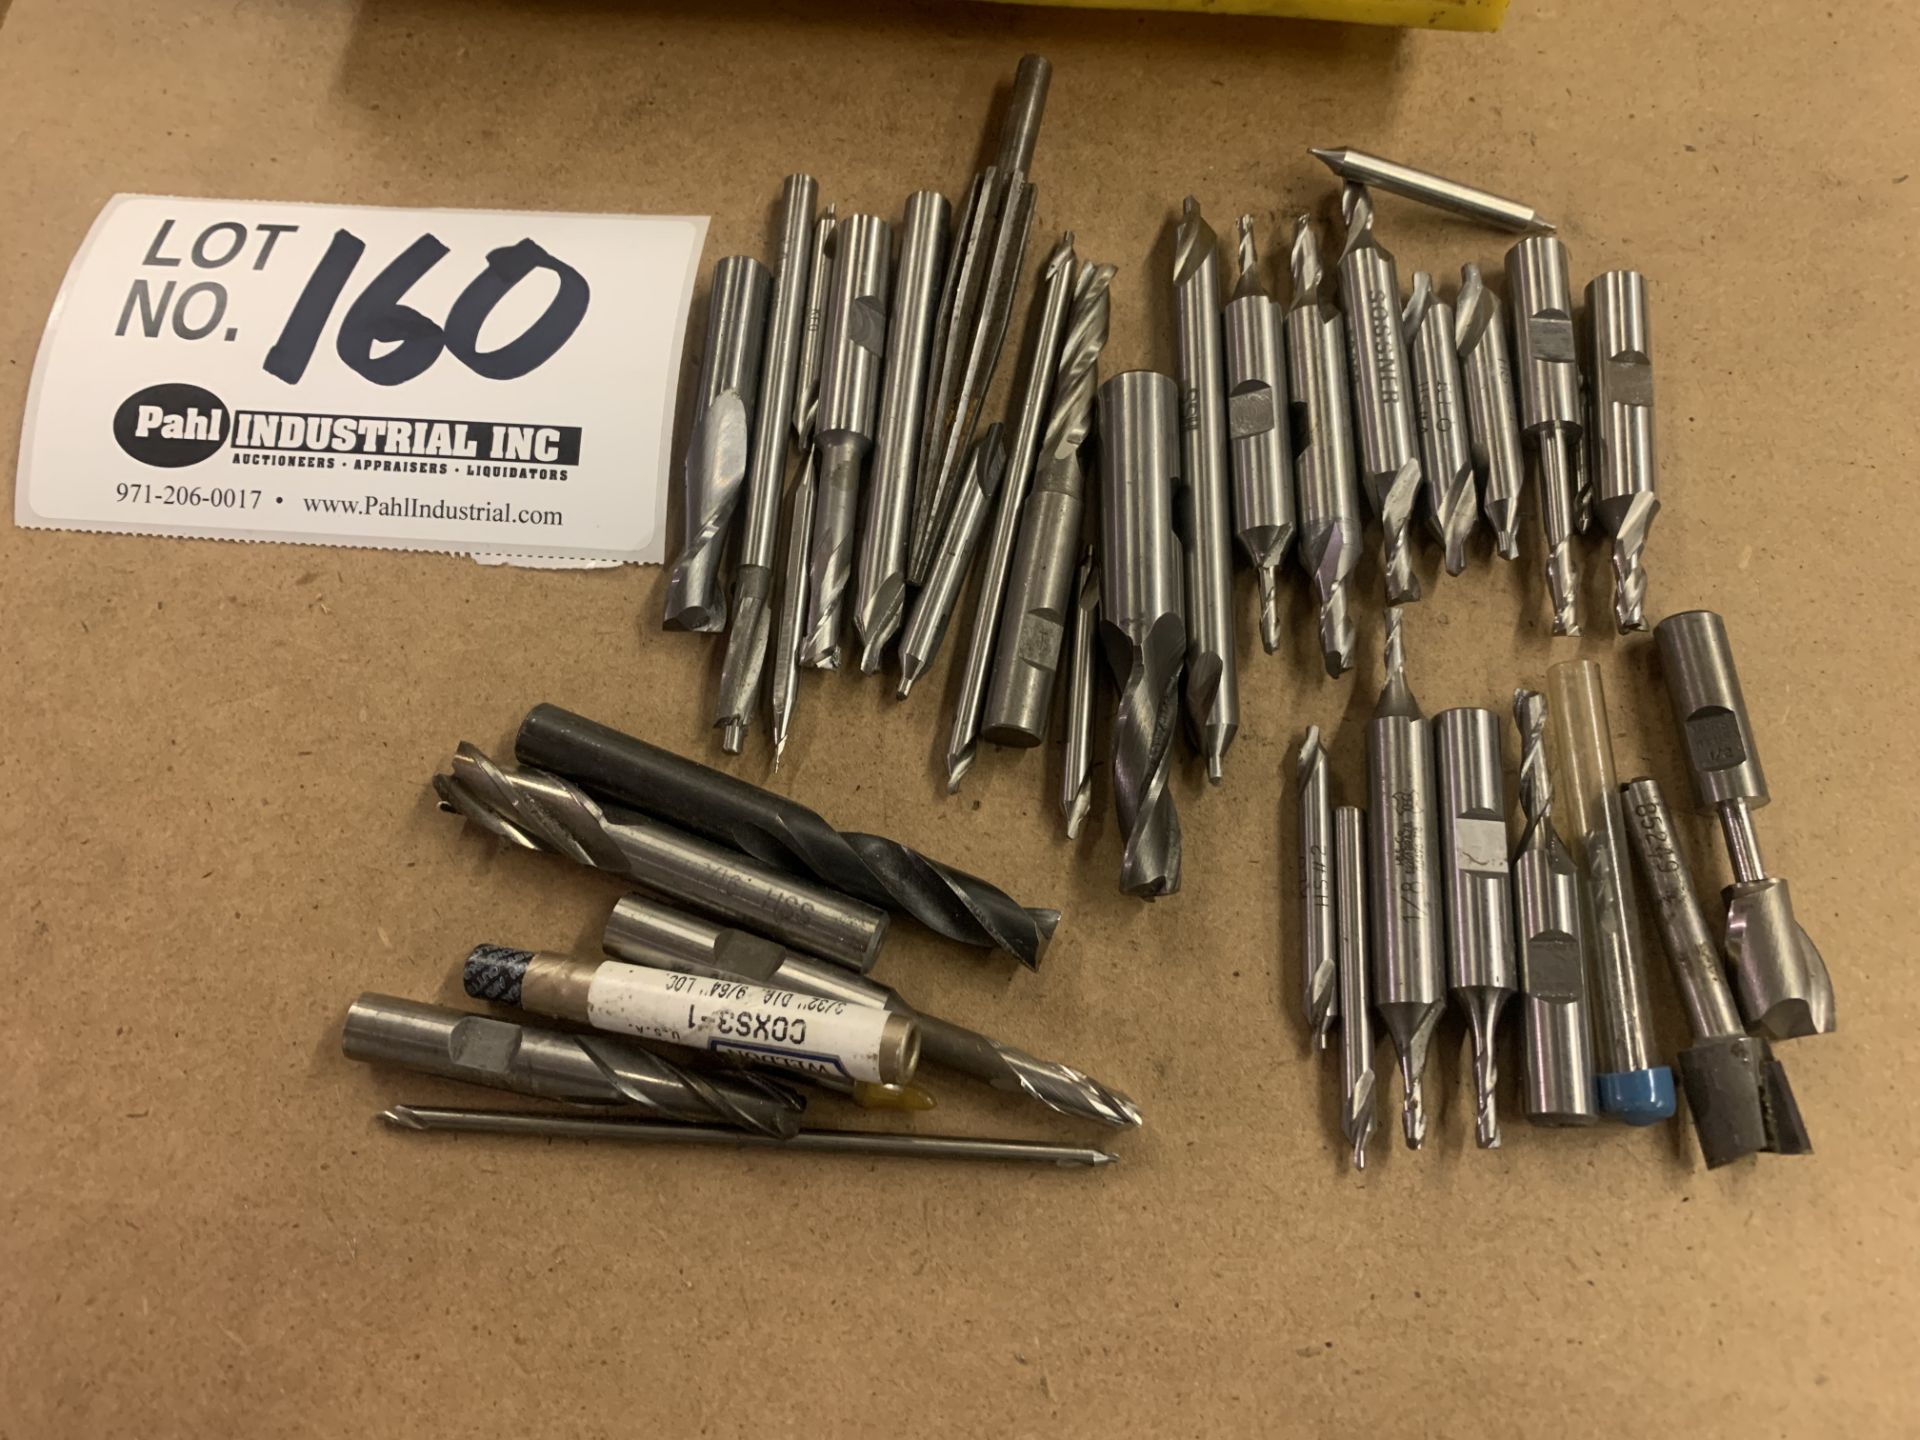 Assorted Precision Center Drills & End Mills